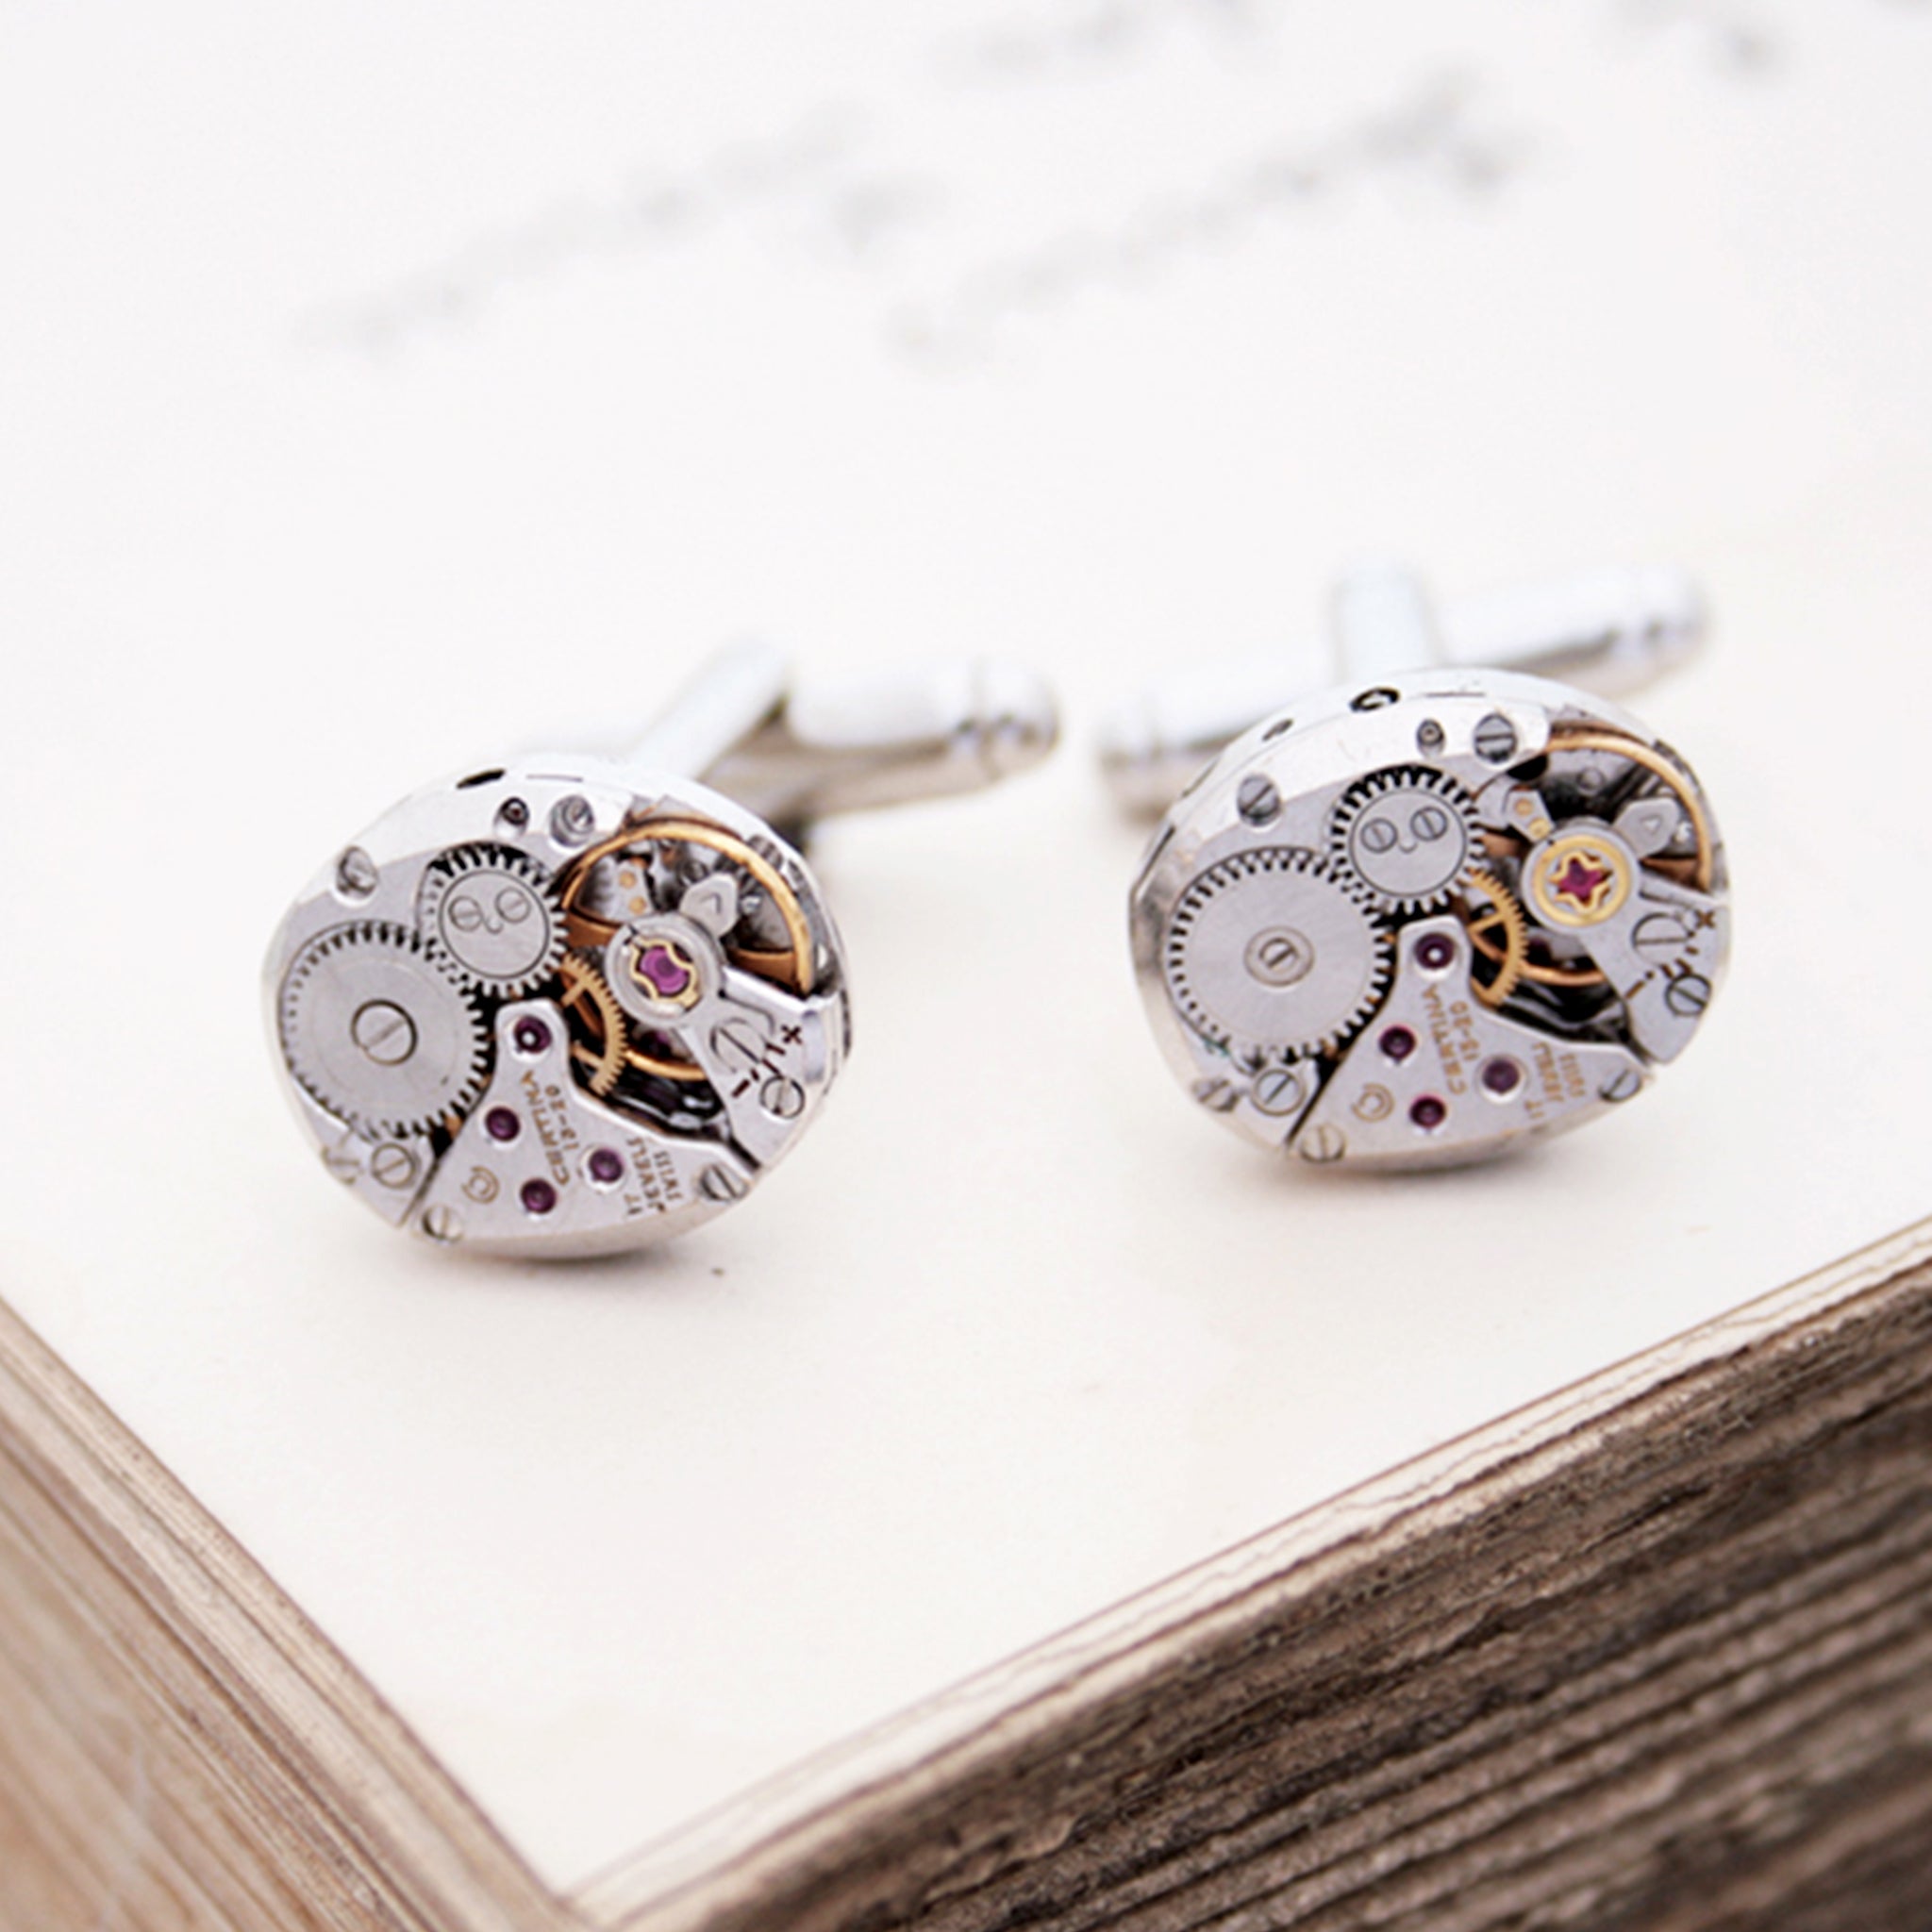 sterling cufflinks made of antique Certina watch movements